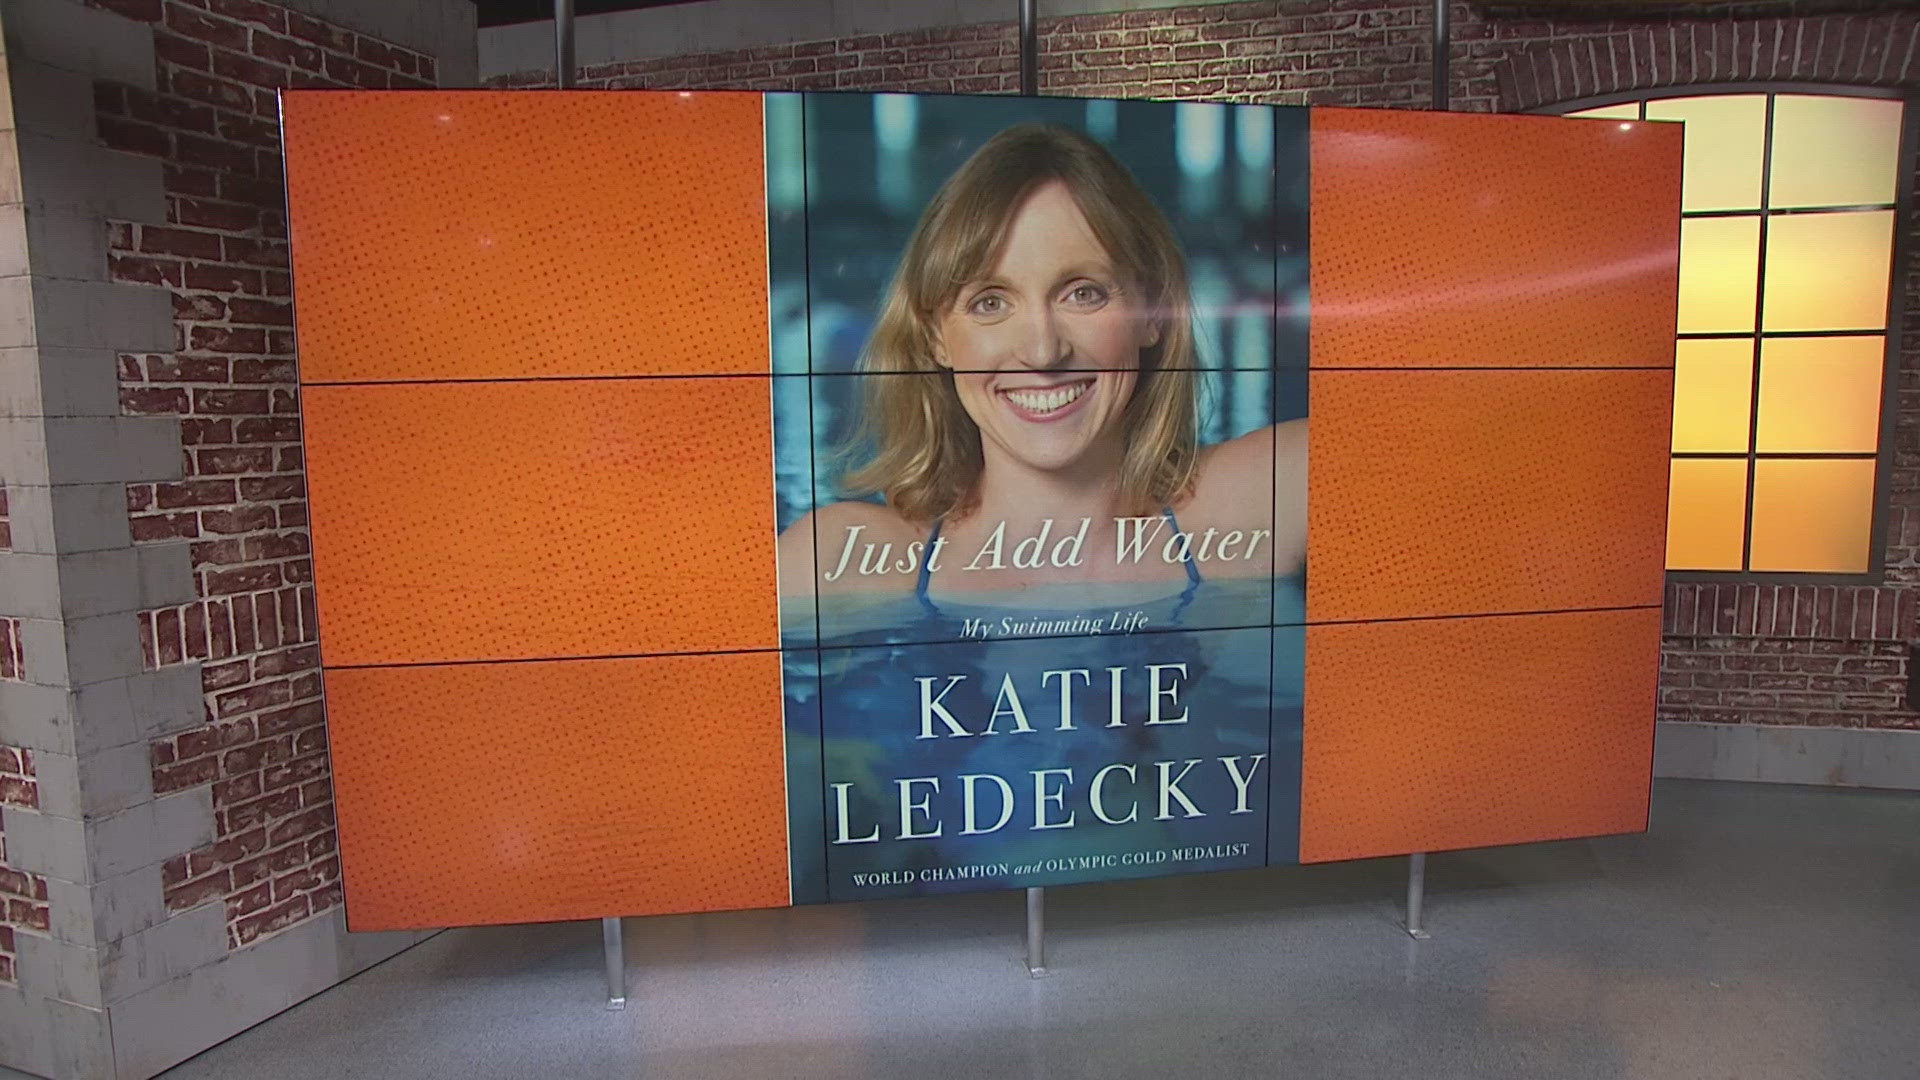 Maryland's Katie Ledecky is releases her memoir "Just Add Water--My Swimming Life."